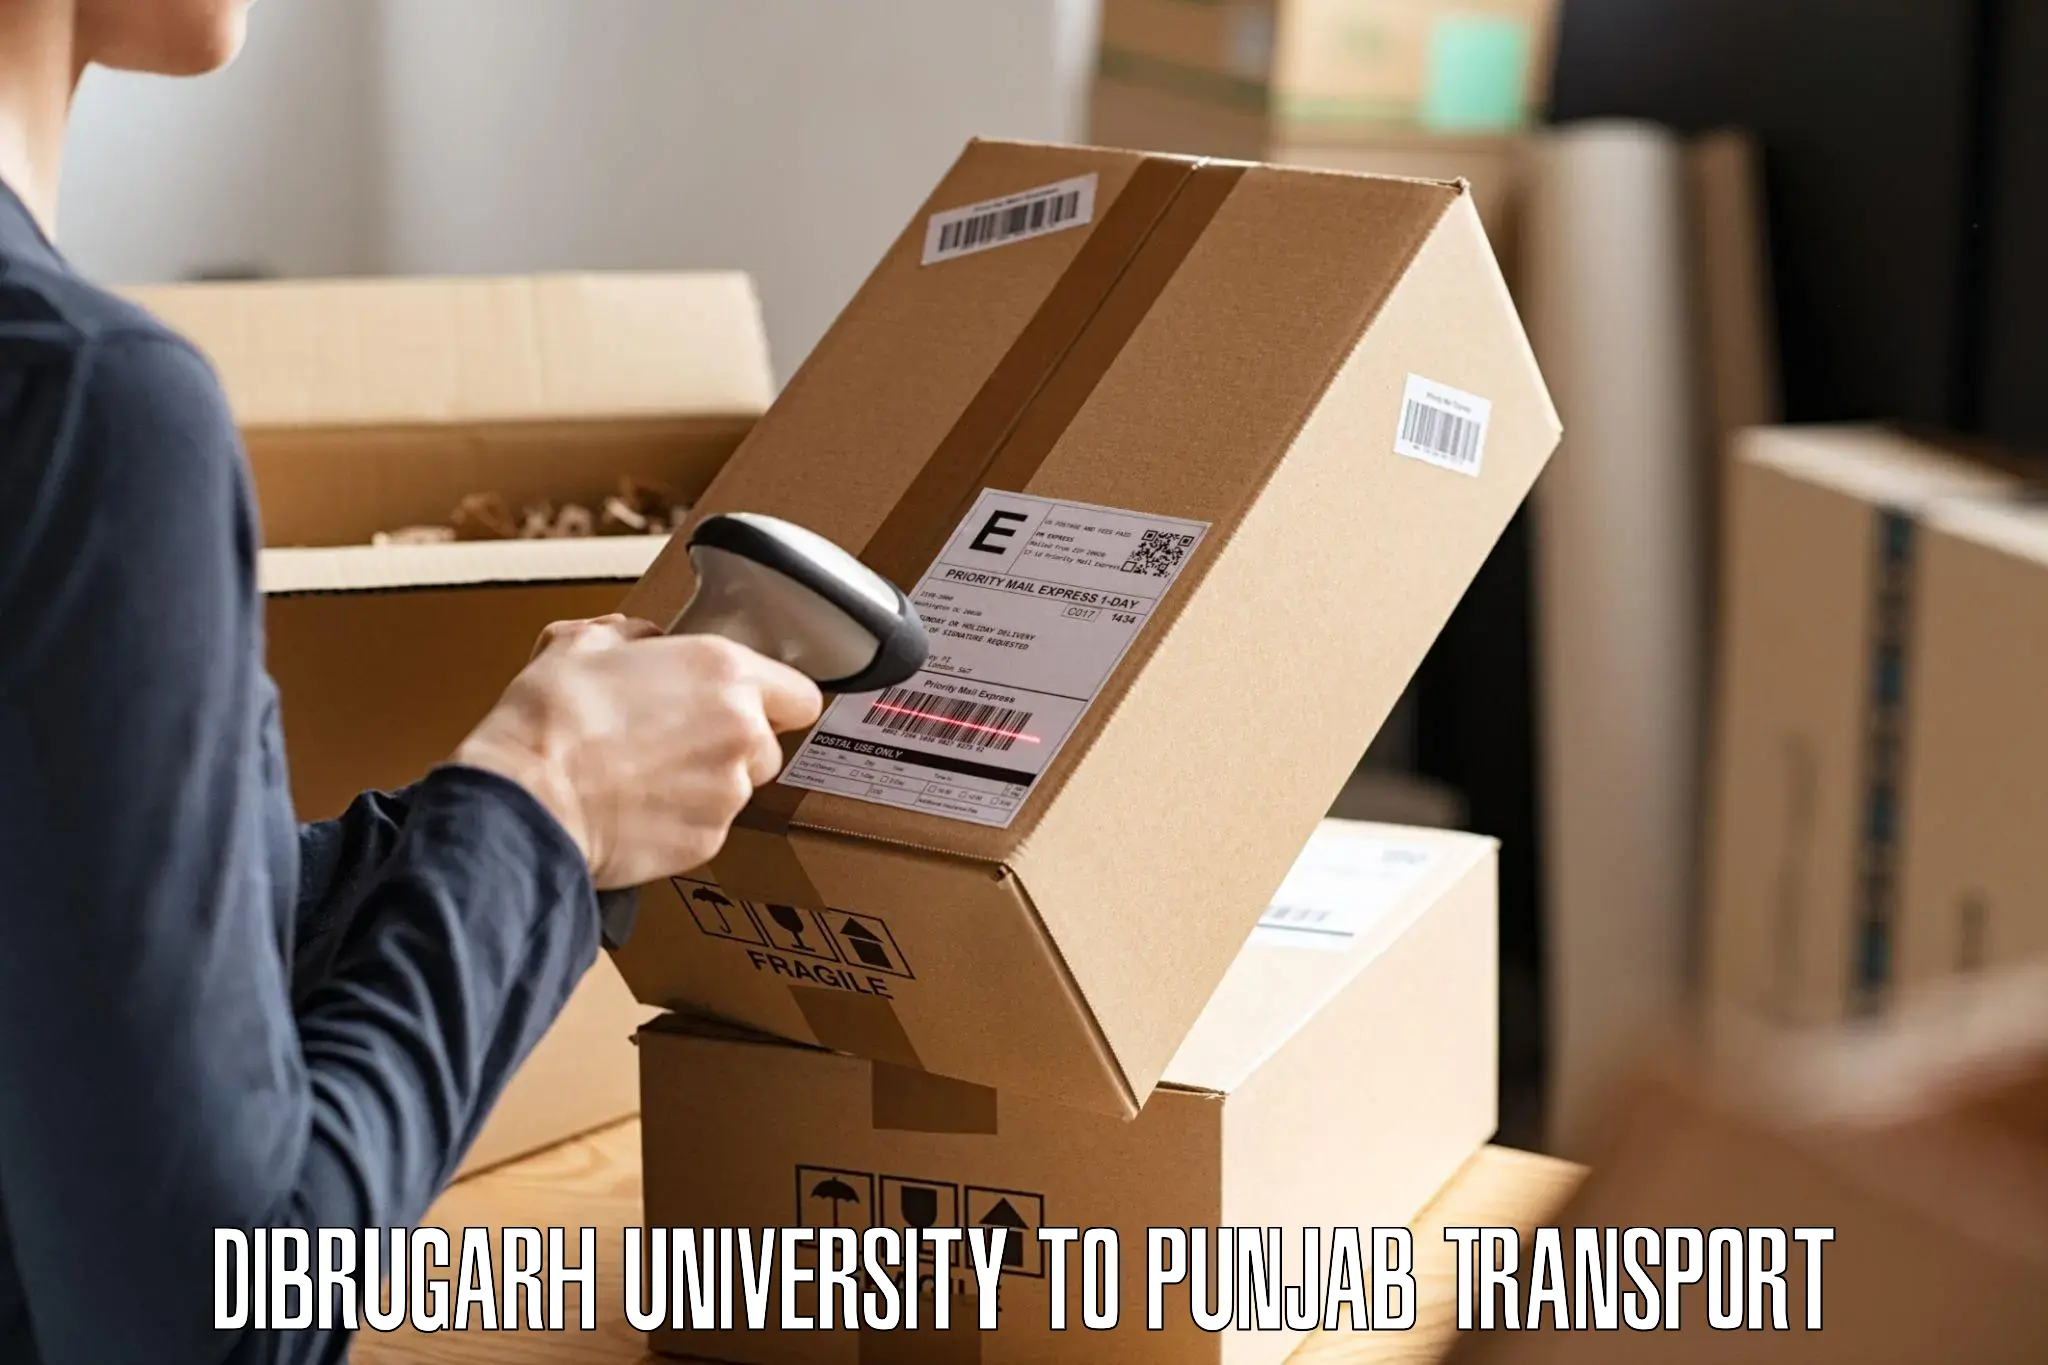 Transport shared services Dibrugarh University to Bagha Purana